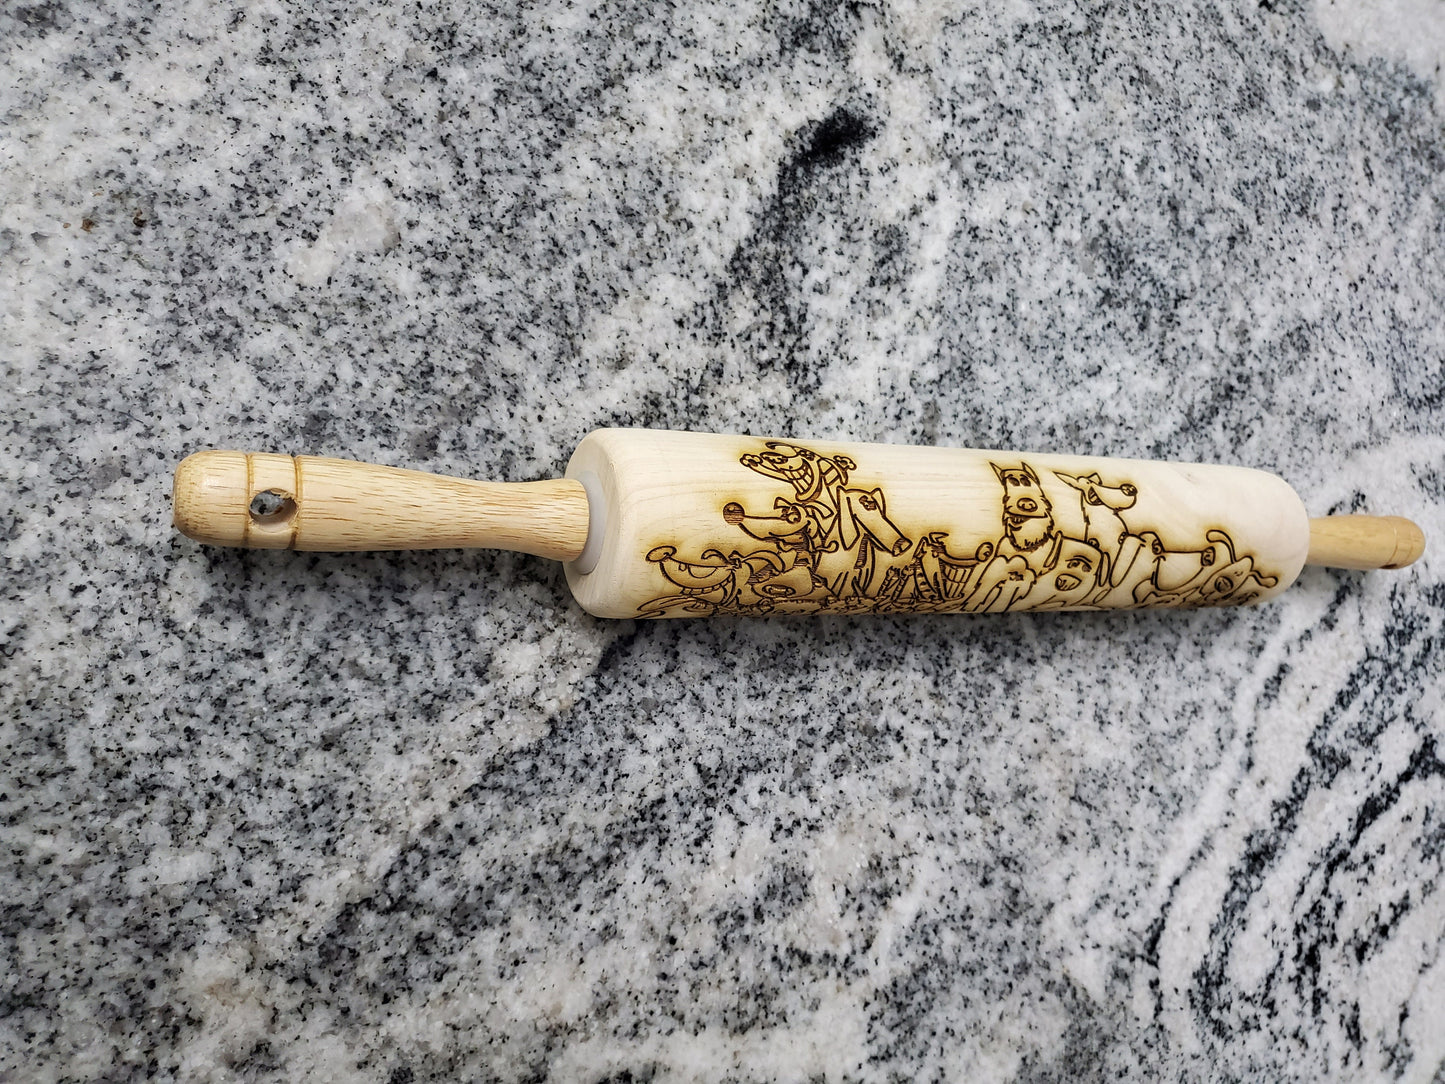 Dog, Pets, Animals, Rolling Pin, Texture, Embossed, Engraved, Wooden Rolling Pin, Cookie Stamp, Laser, Pottery